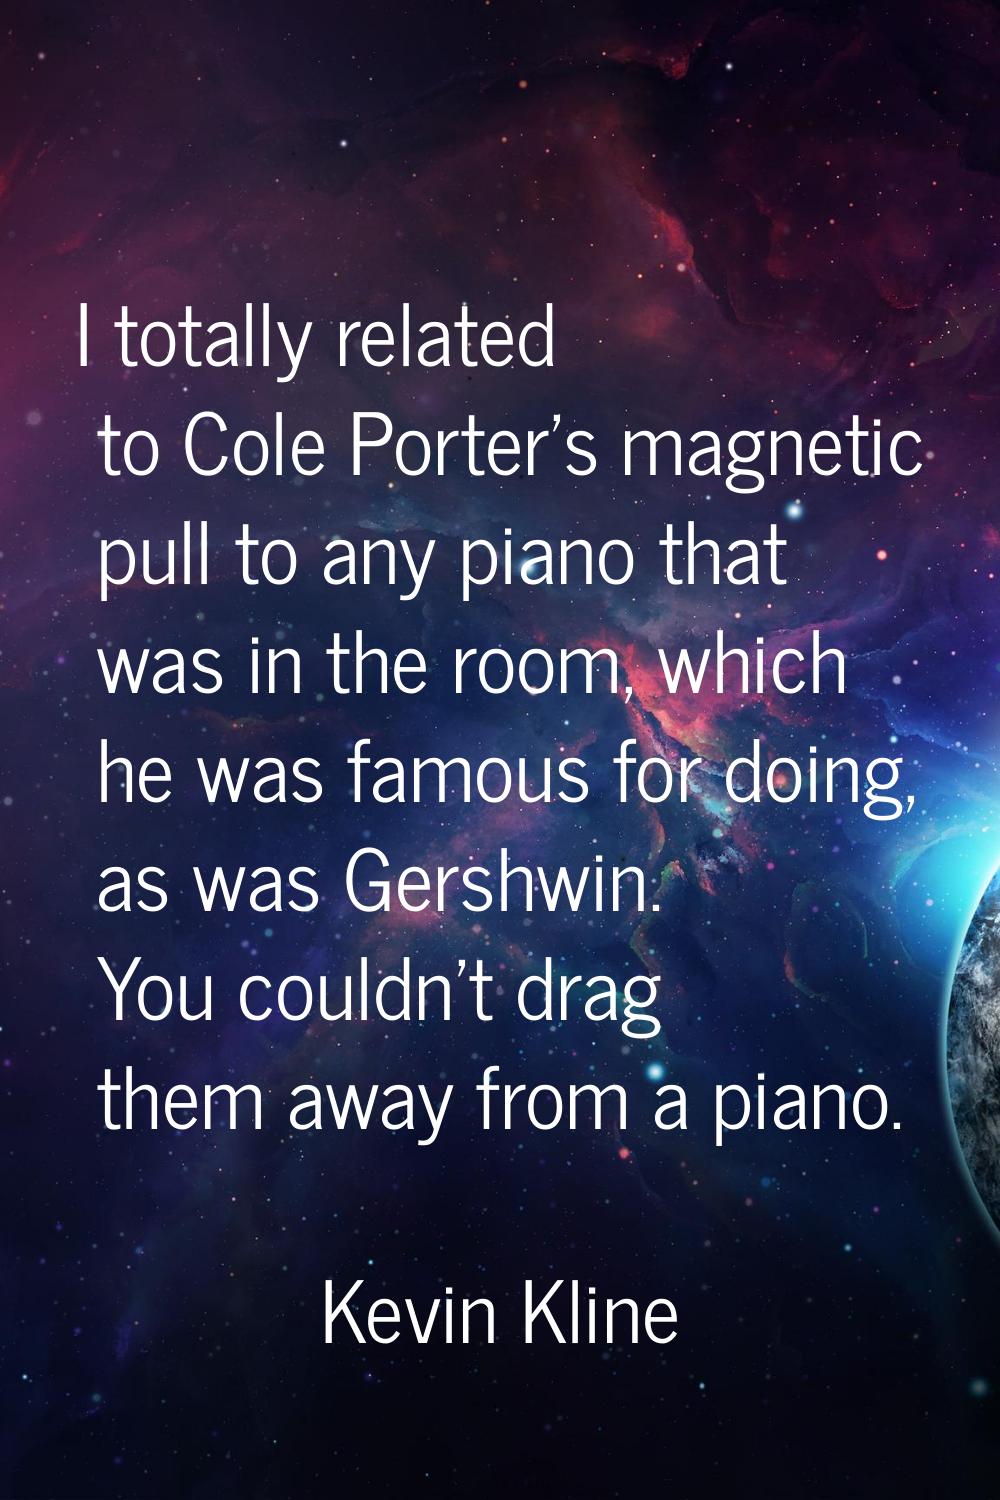 I totally related to Cole Porter's magnetic pull to any piano that was in the room, which he was fa